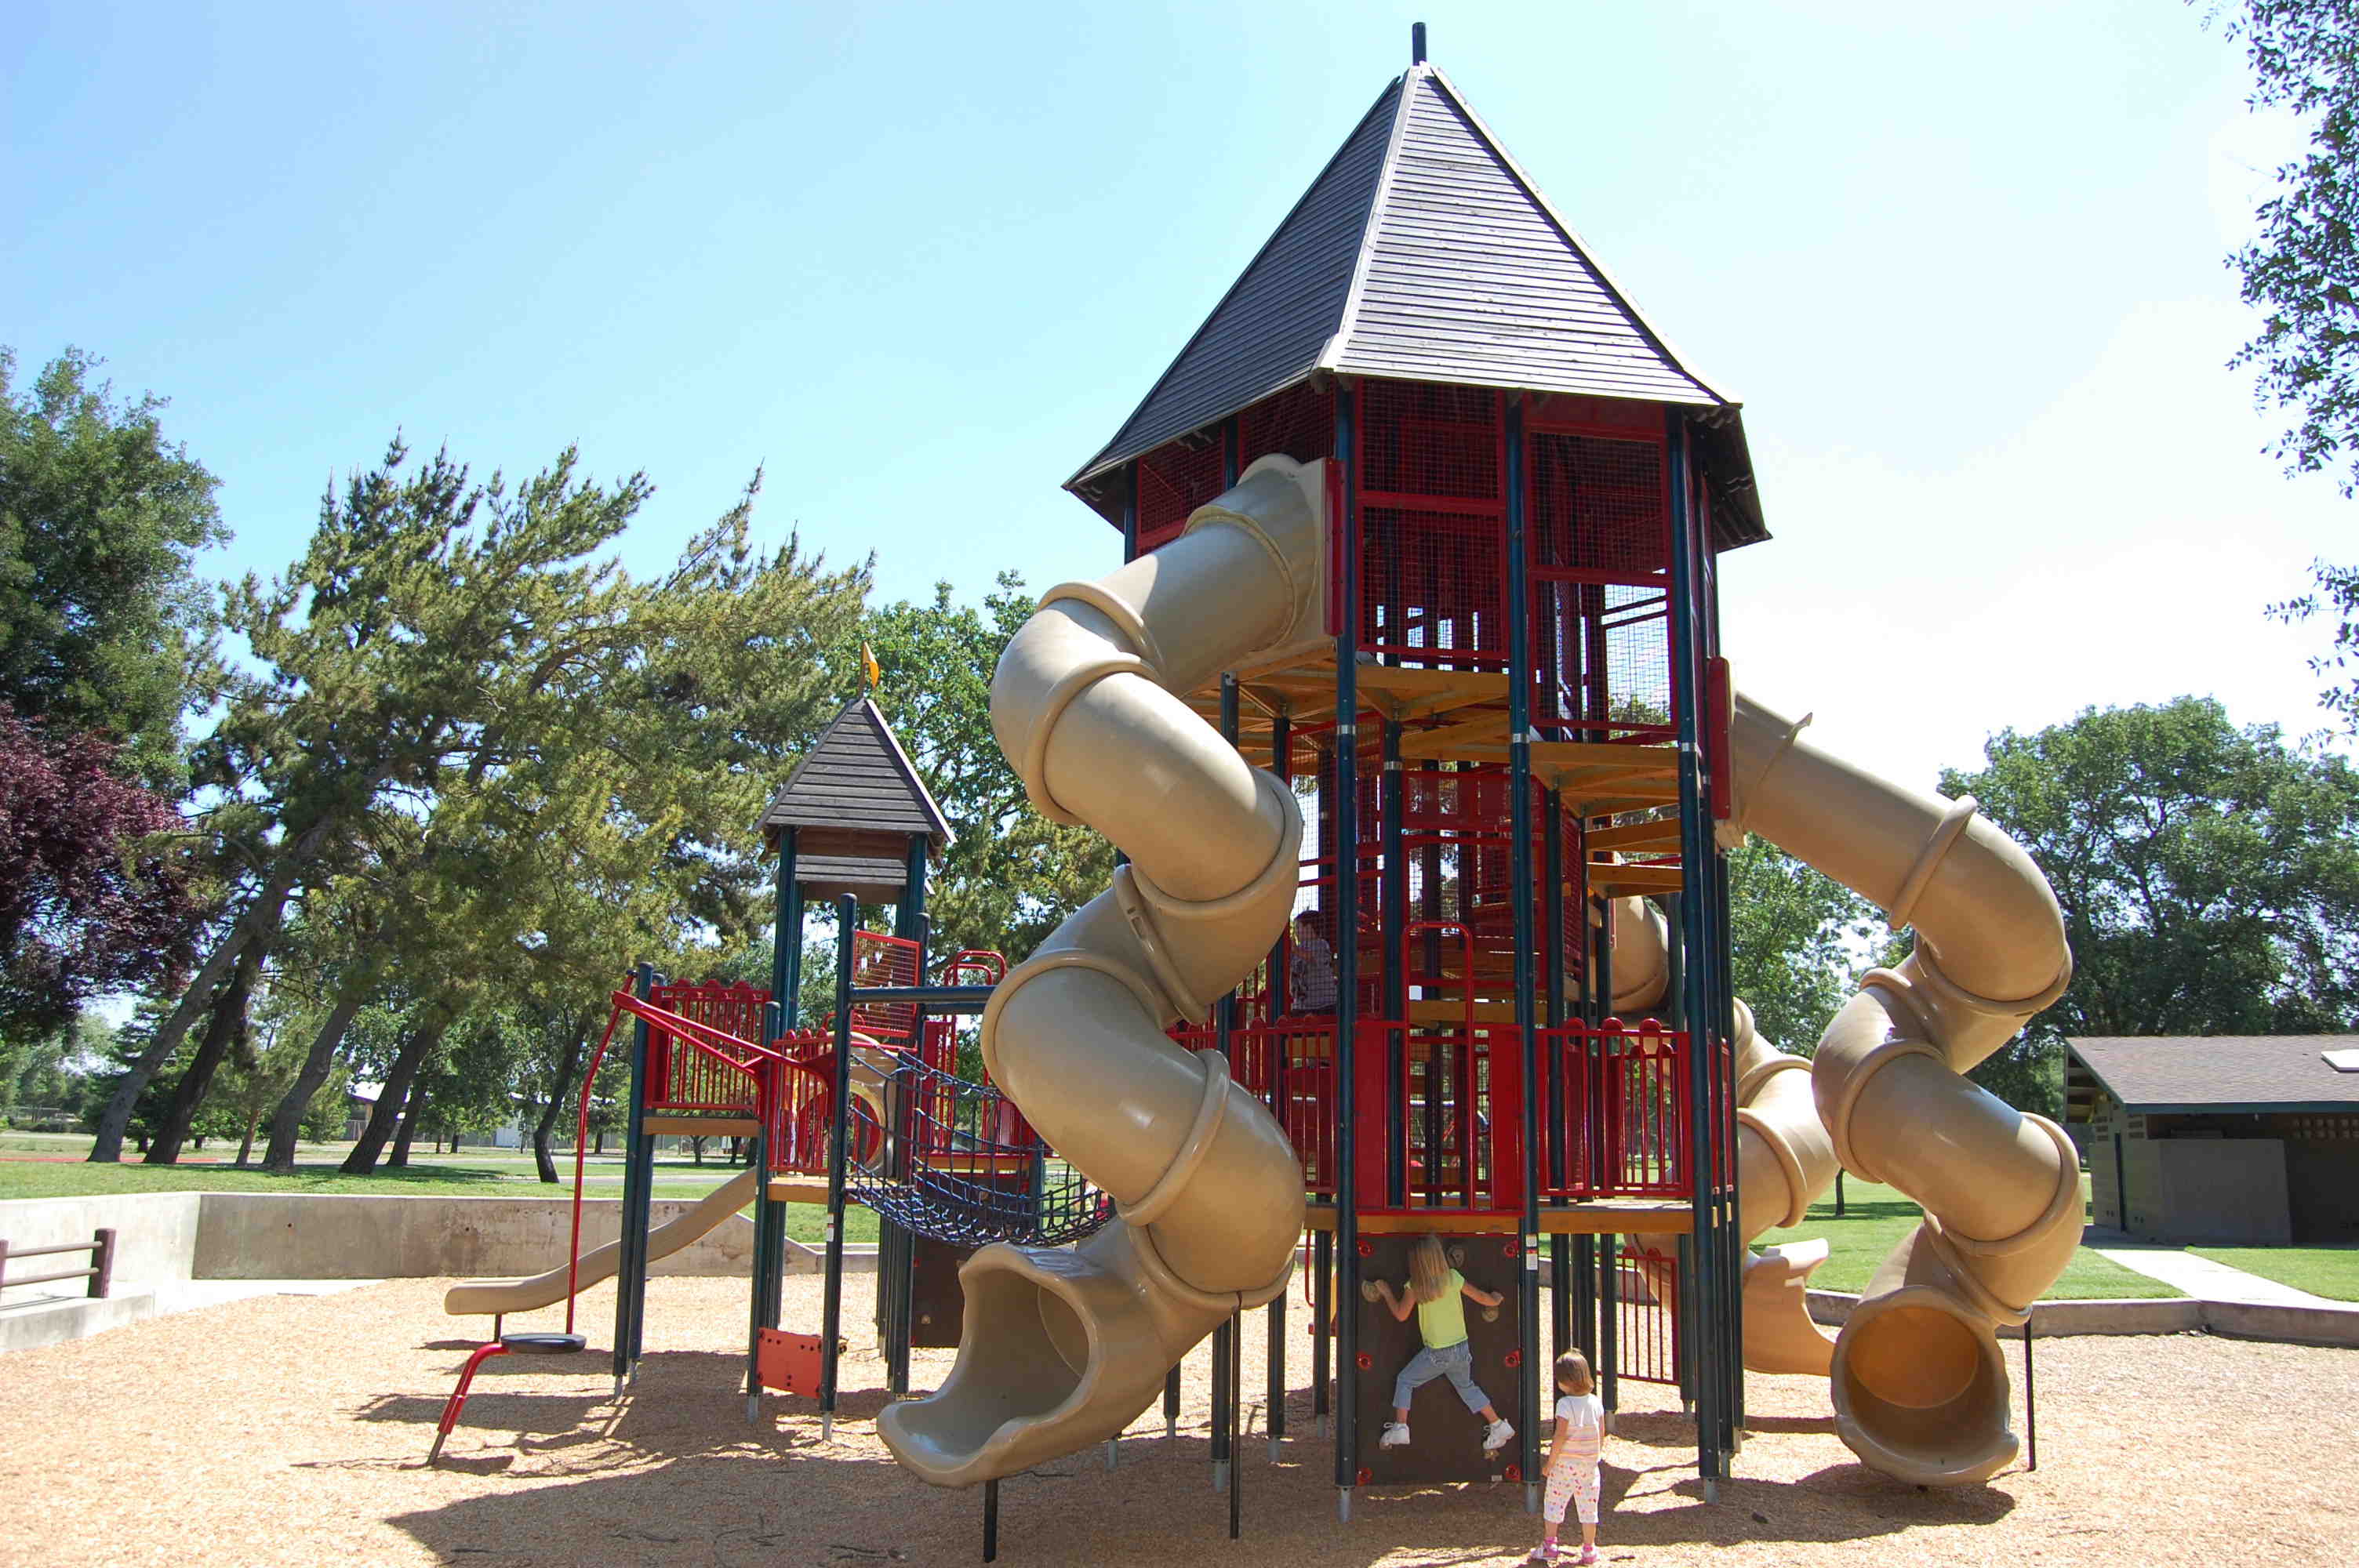 Designing Play: The Miracle Play Systems Blog | The Playground ...